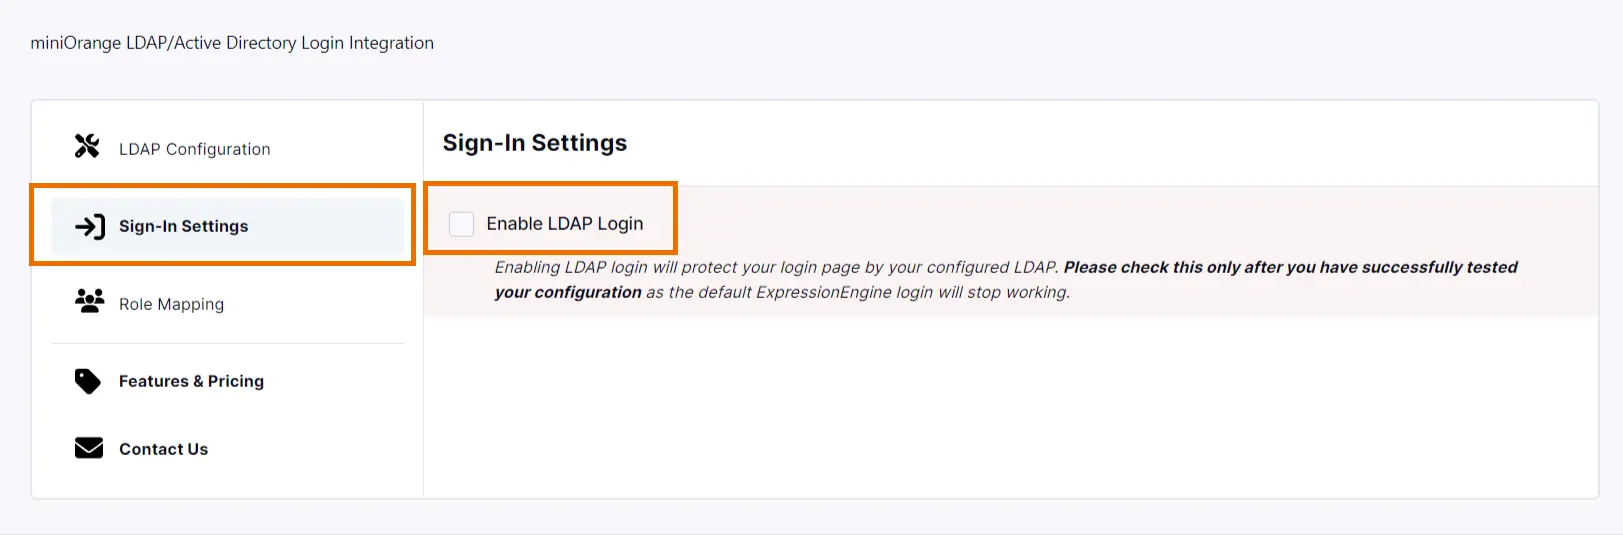 LDAP integration for ExpressionEngine Sign-in settings